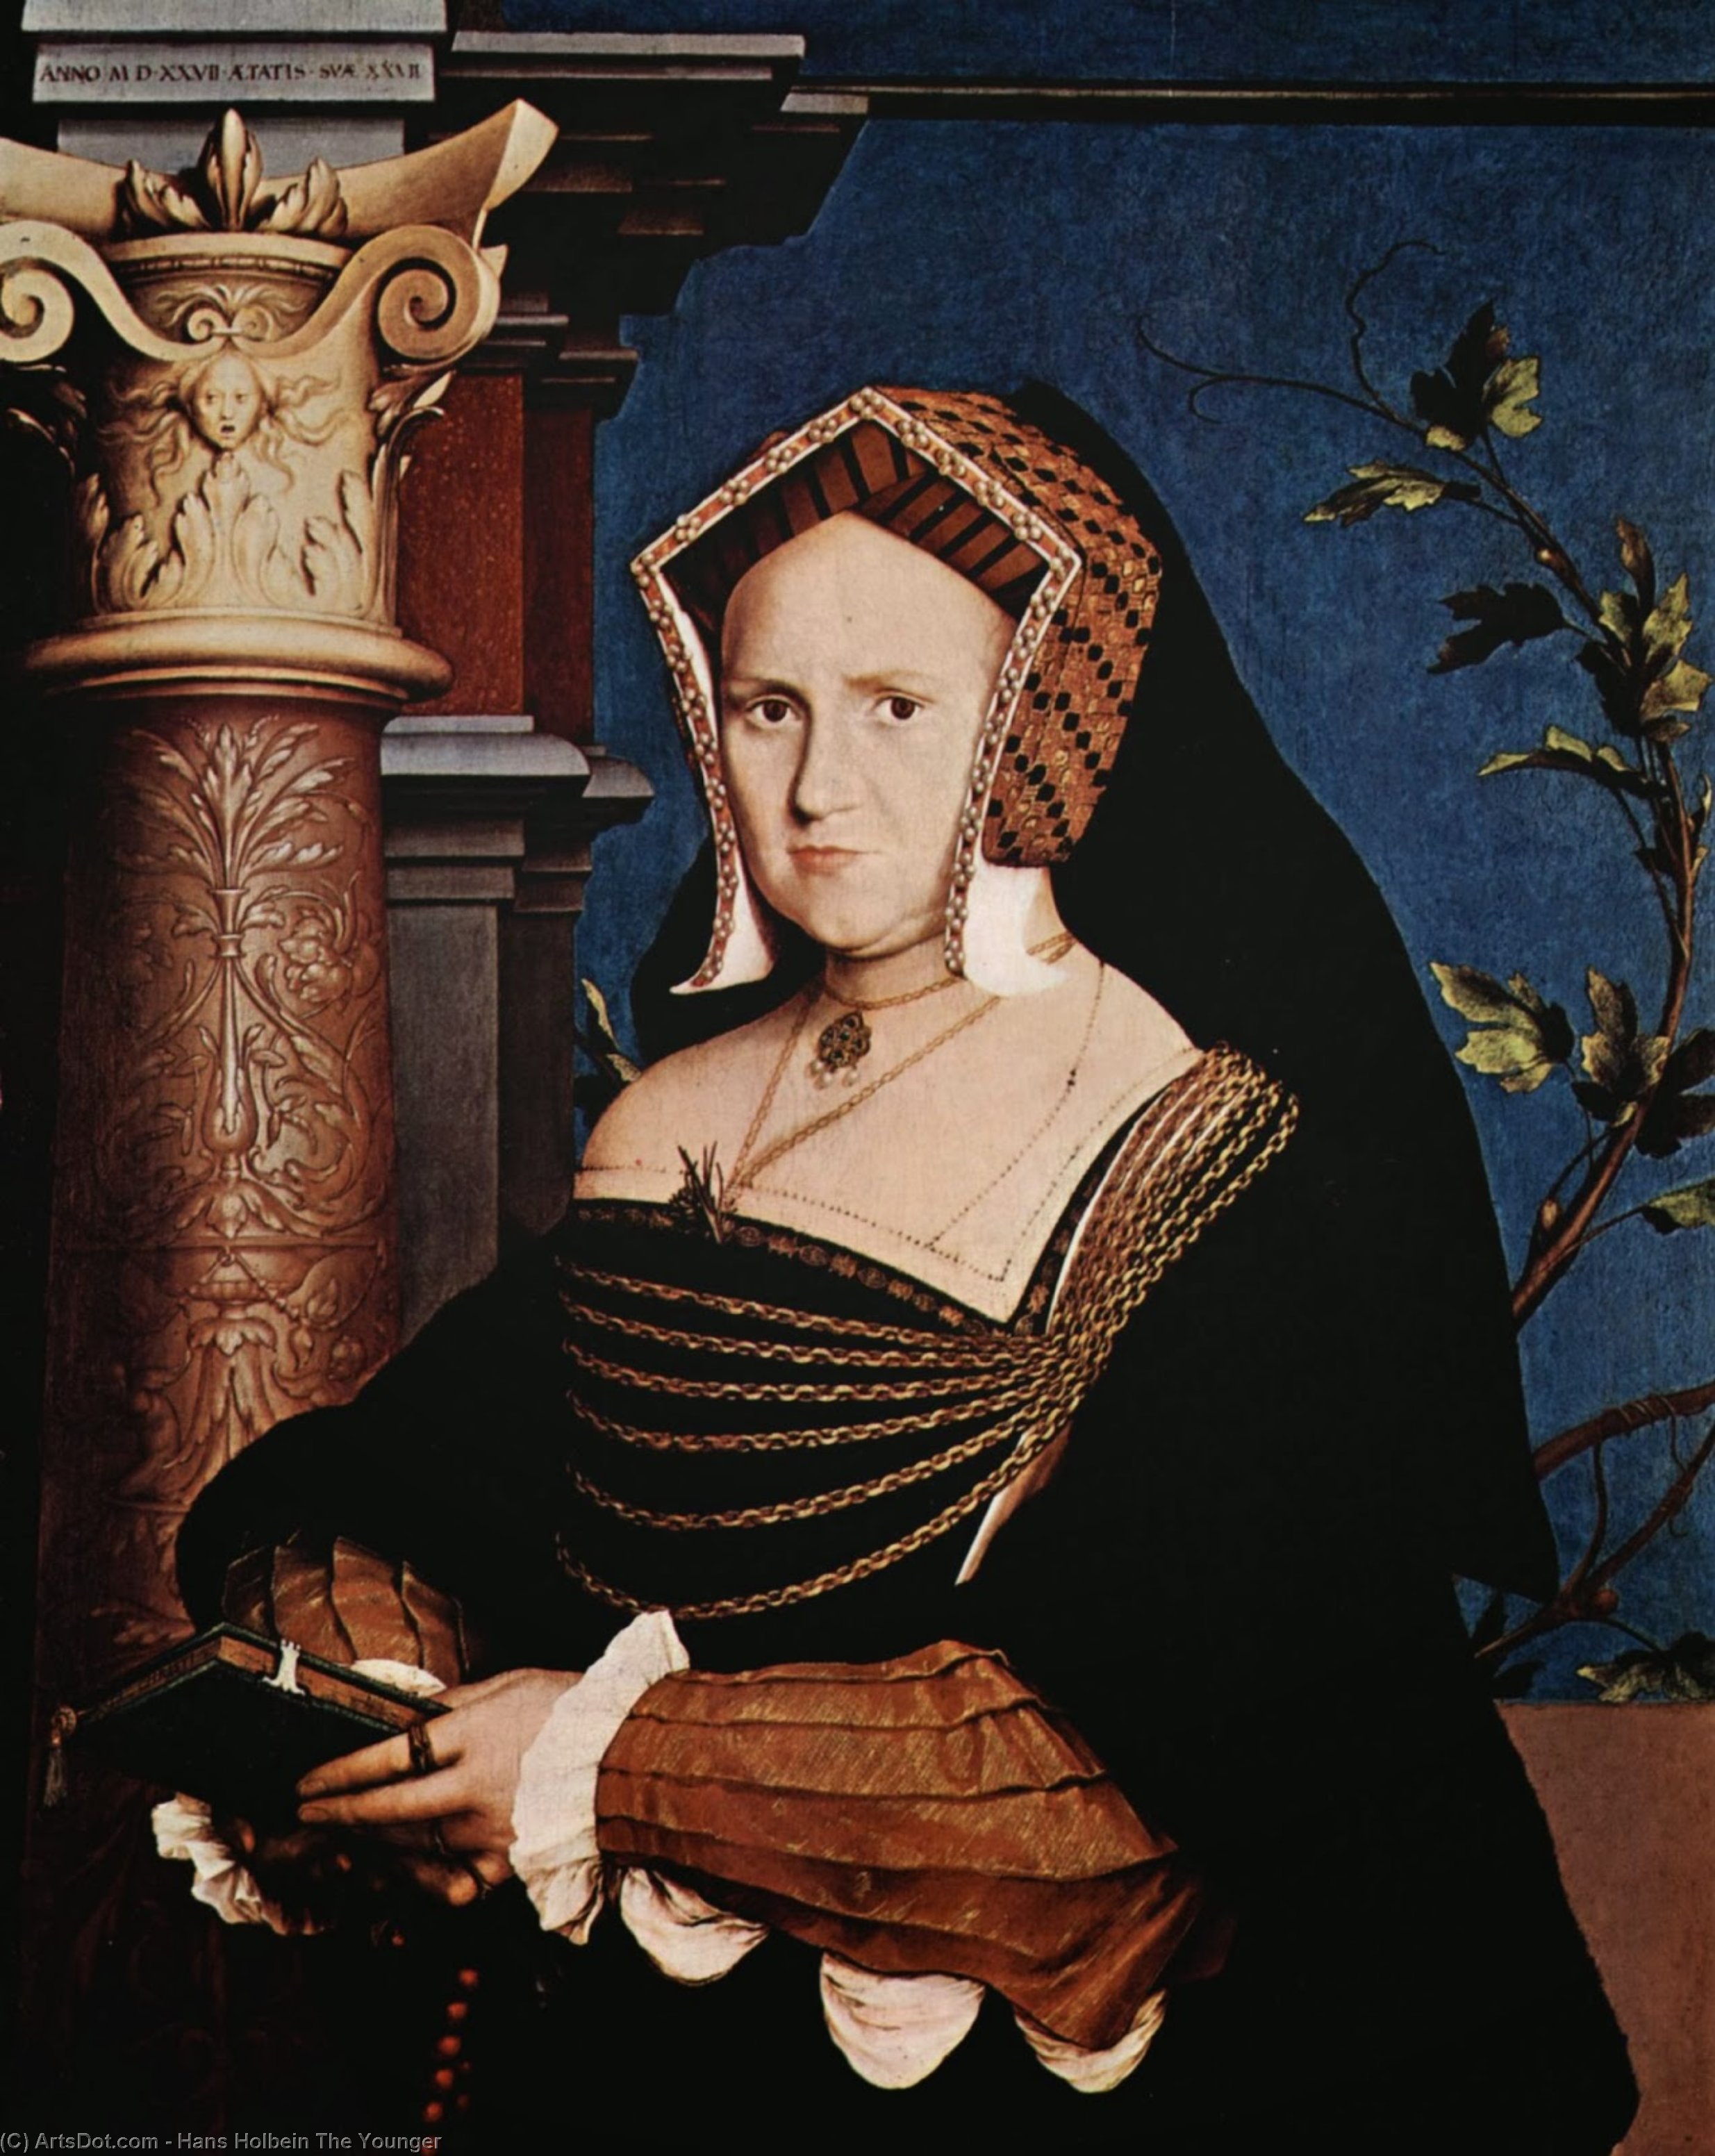 WikiOO.org - دایره المعارف هنرهای زیبا - نقاشی، آثار هنری Hans Holbein The Younger - Portrait of Mary Wotton, Lady Guildenford